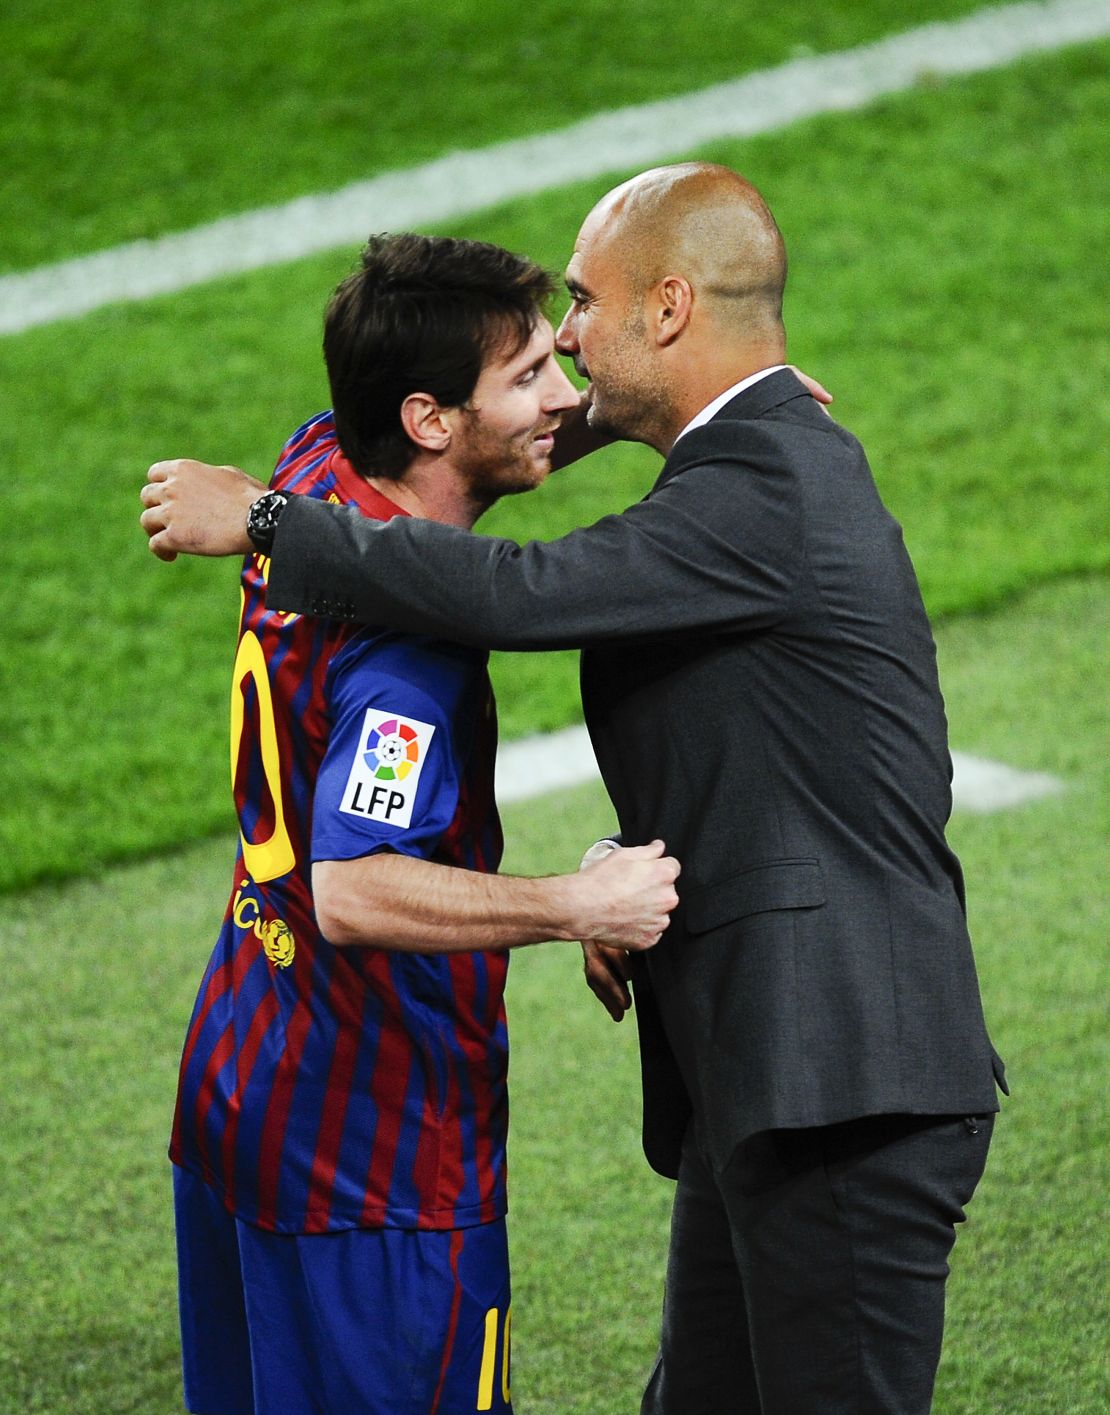 Could Lionel Messi join up with former coach Pep Guardiola at Manchester City?